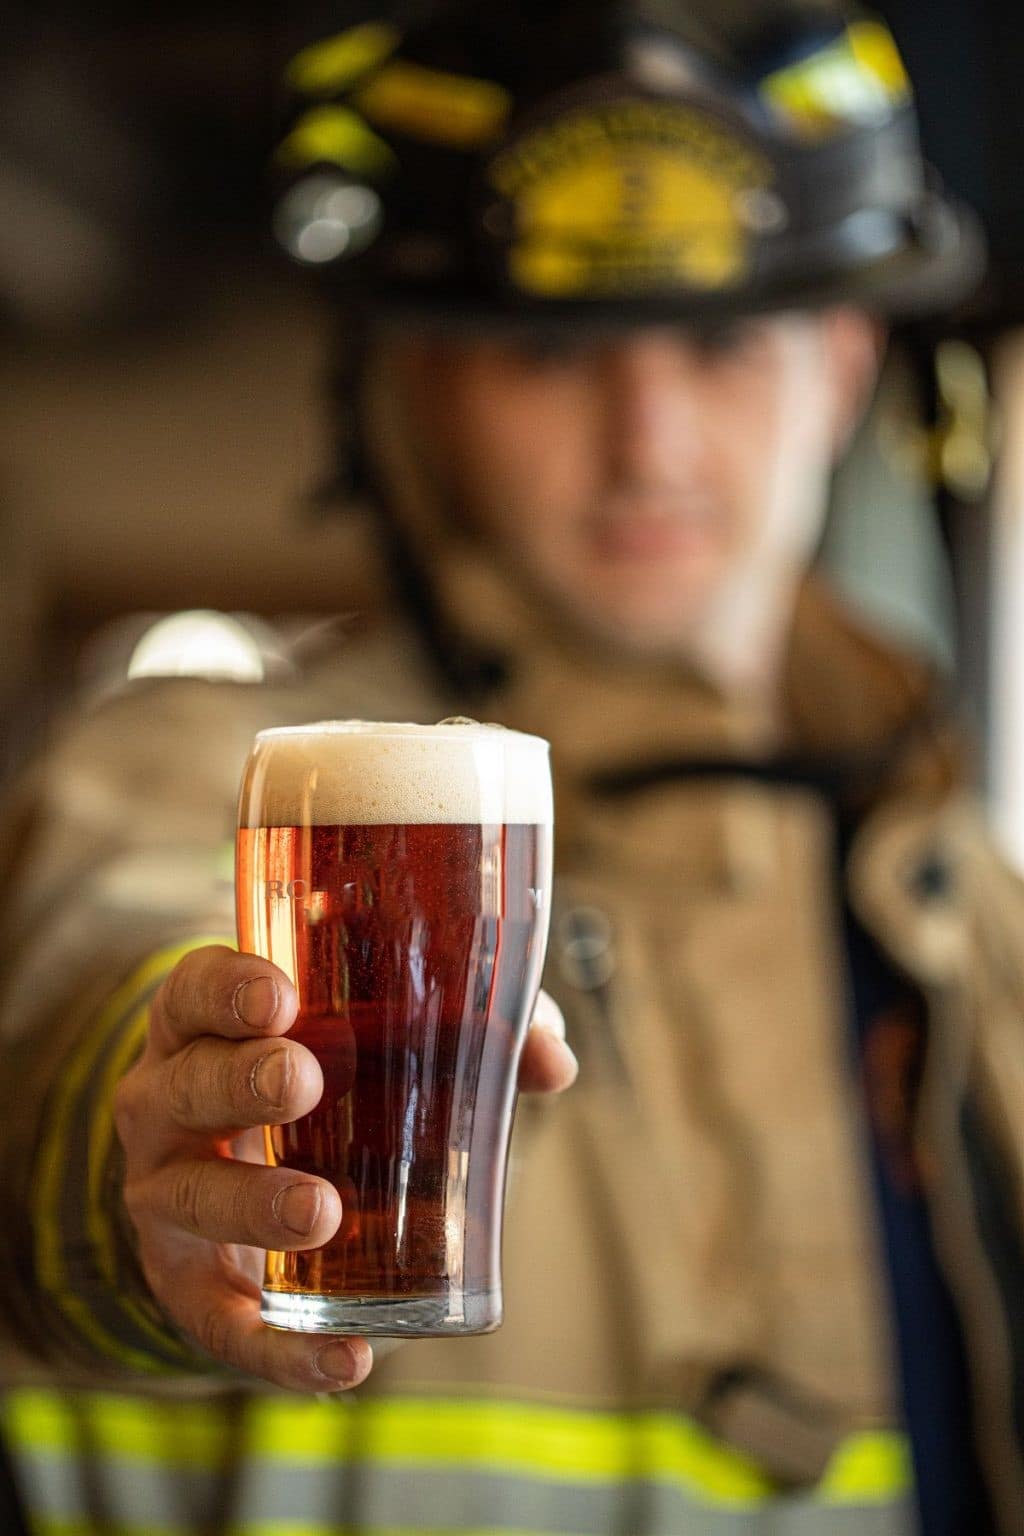 firefighter with drinking problem needing addiction treatment